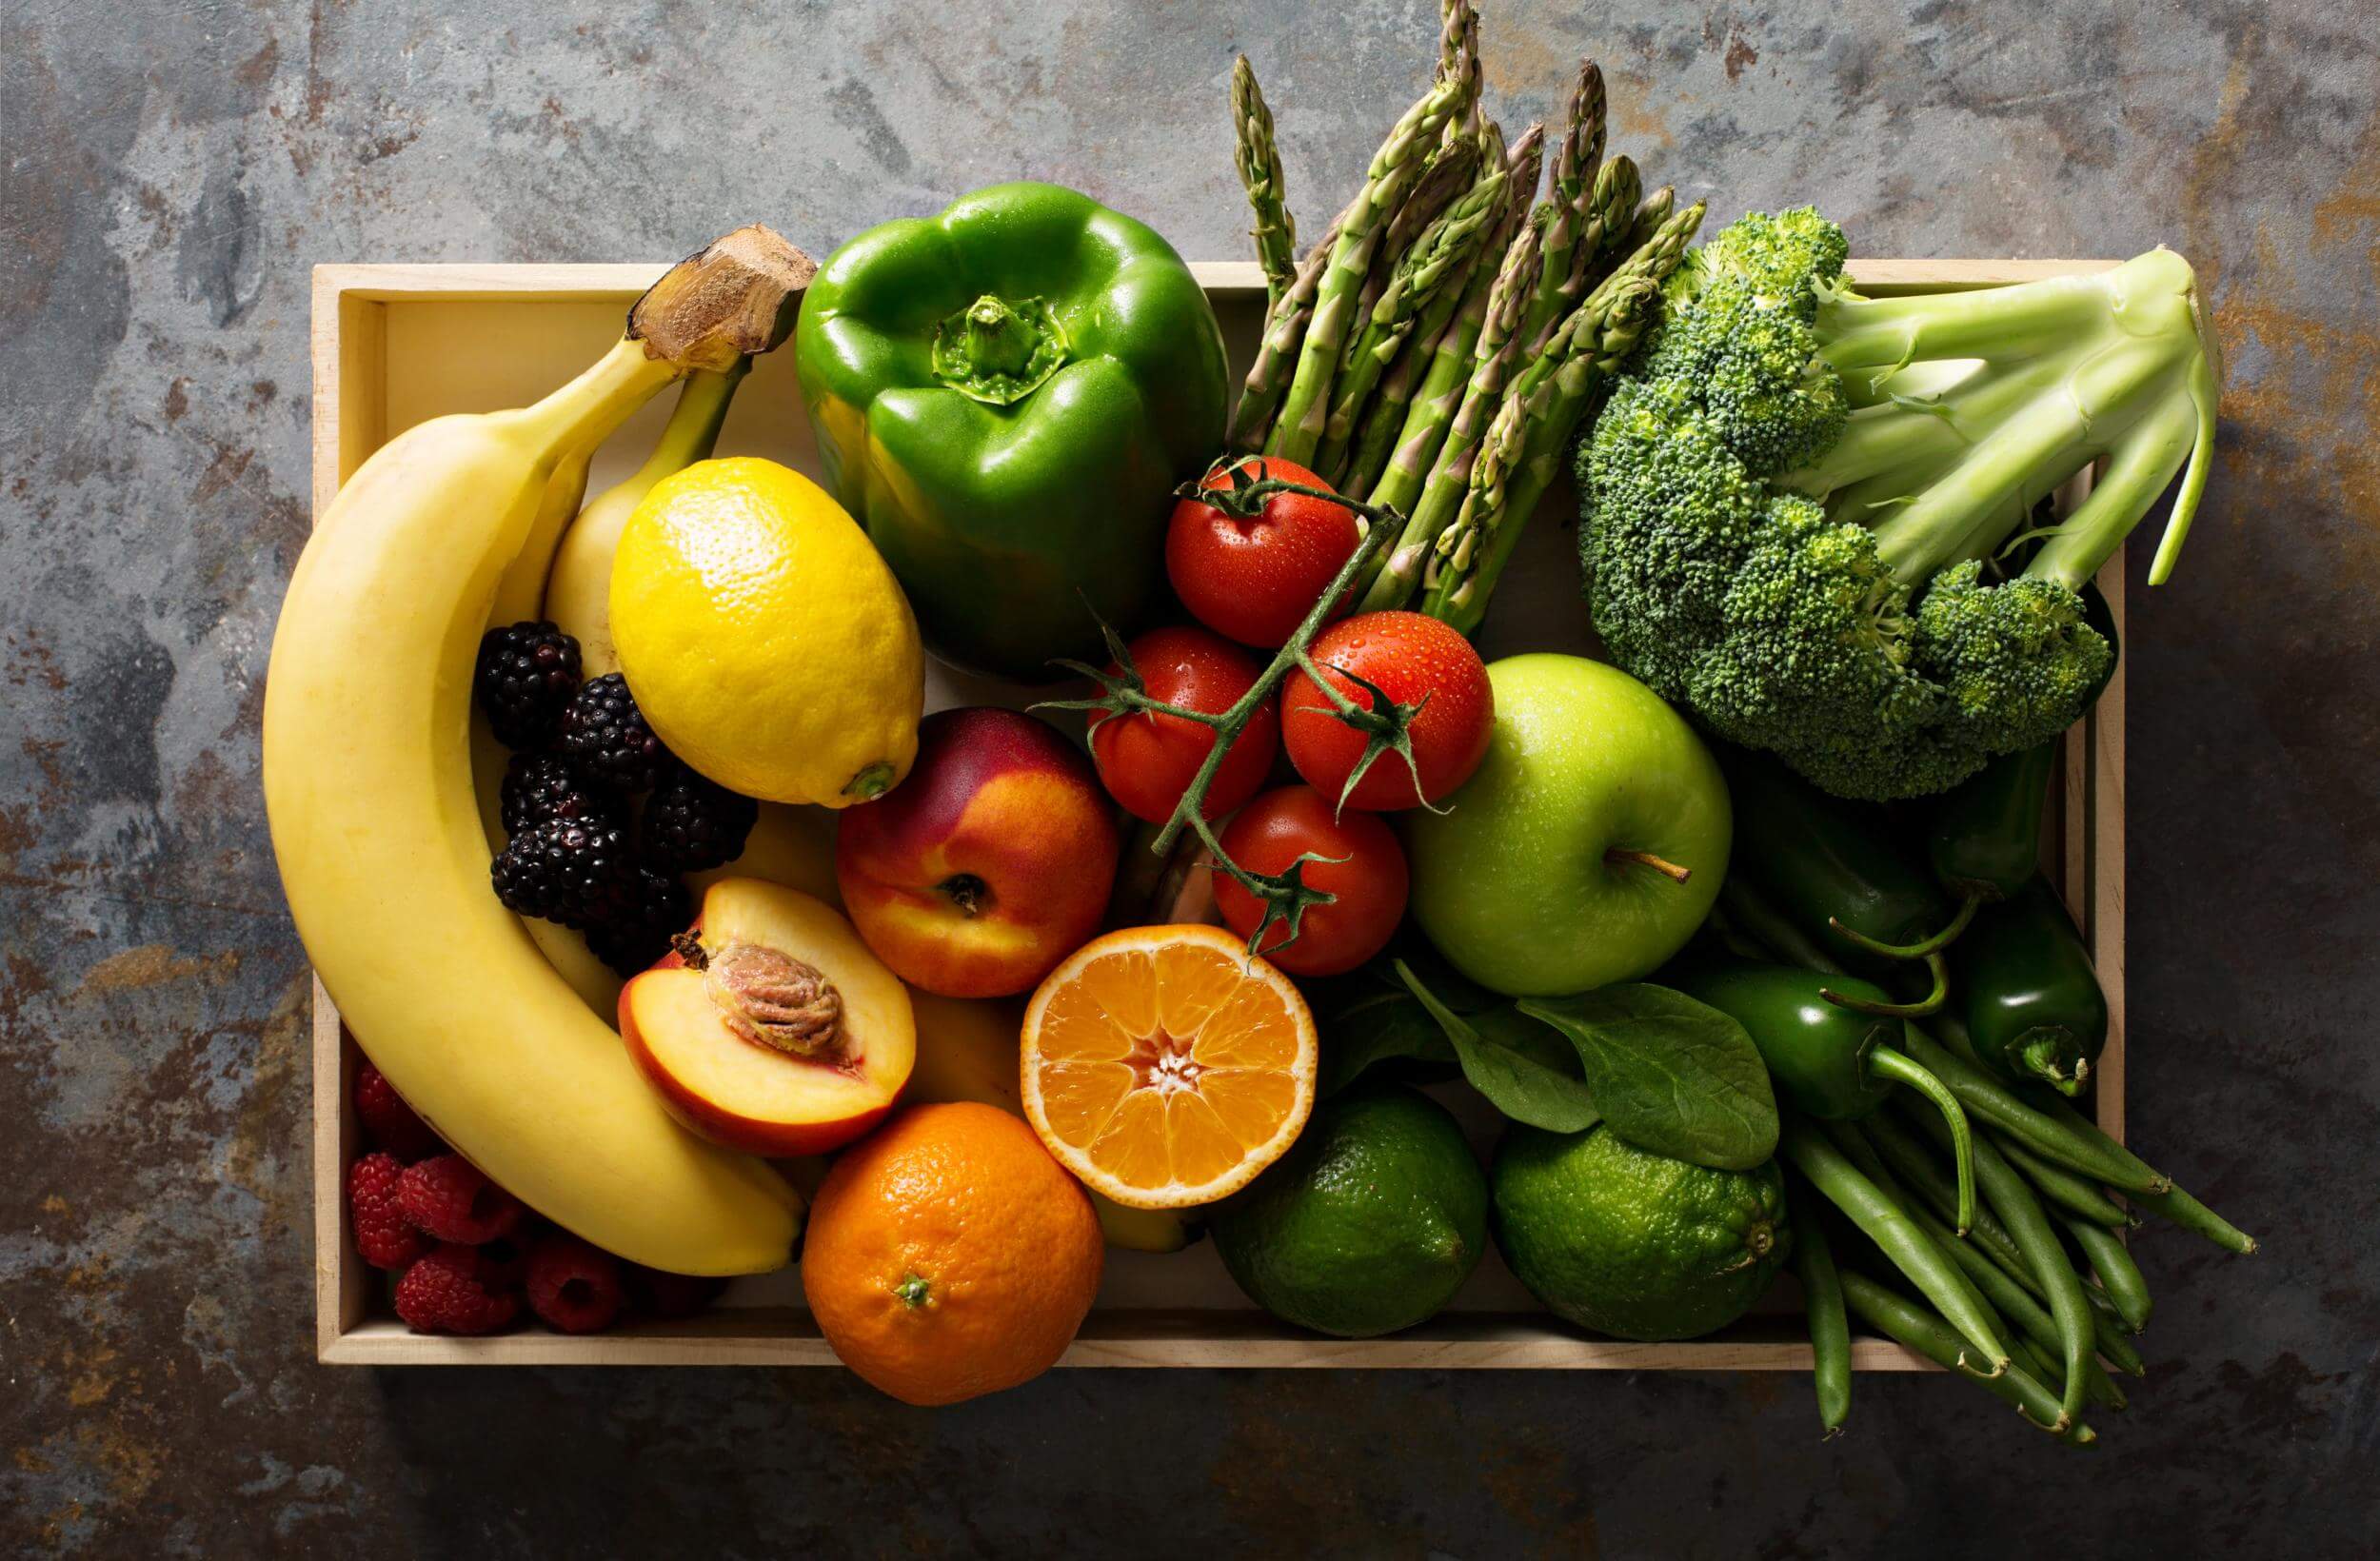 Phyte away sickness with colorful fruits and vegetables - UT Physicians